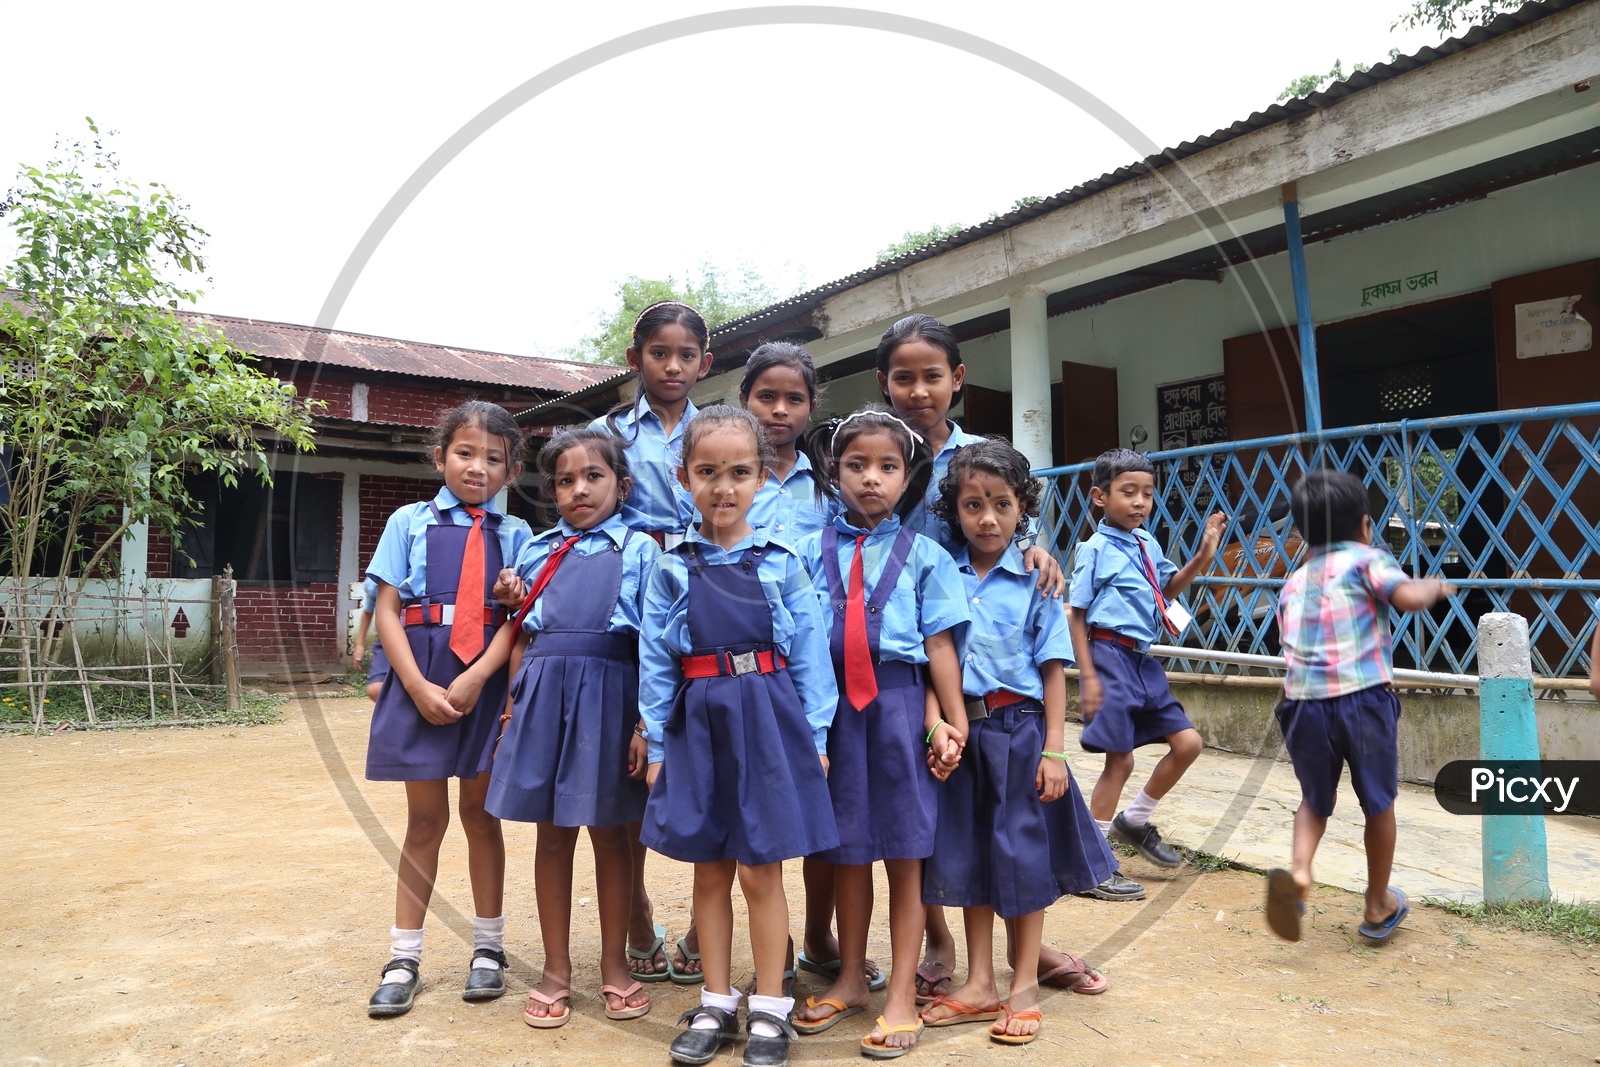 School Children Or School Students Wearing Uniforms  with Happily Smiling Faces   In a Rural Village School Premise Or Compound